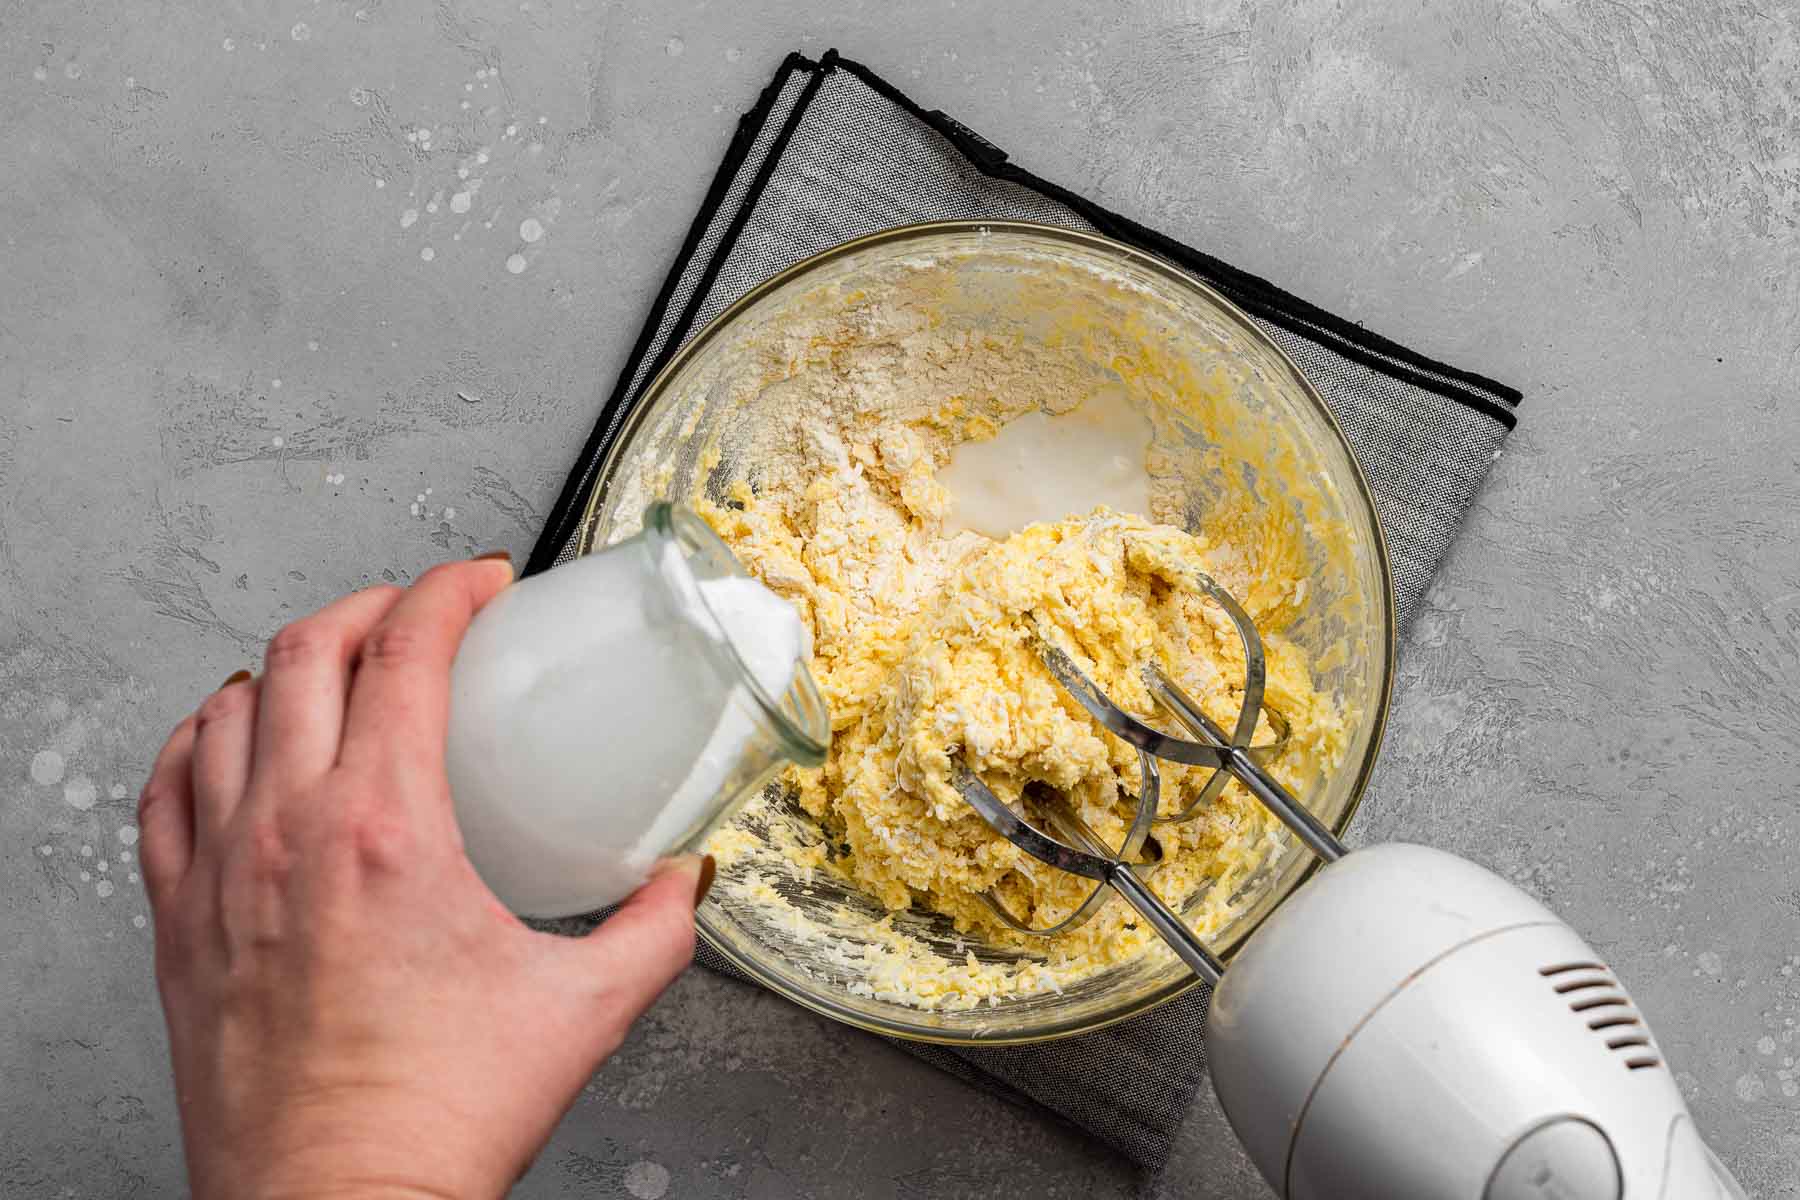 Pouring coconut milk into yellow batter.